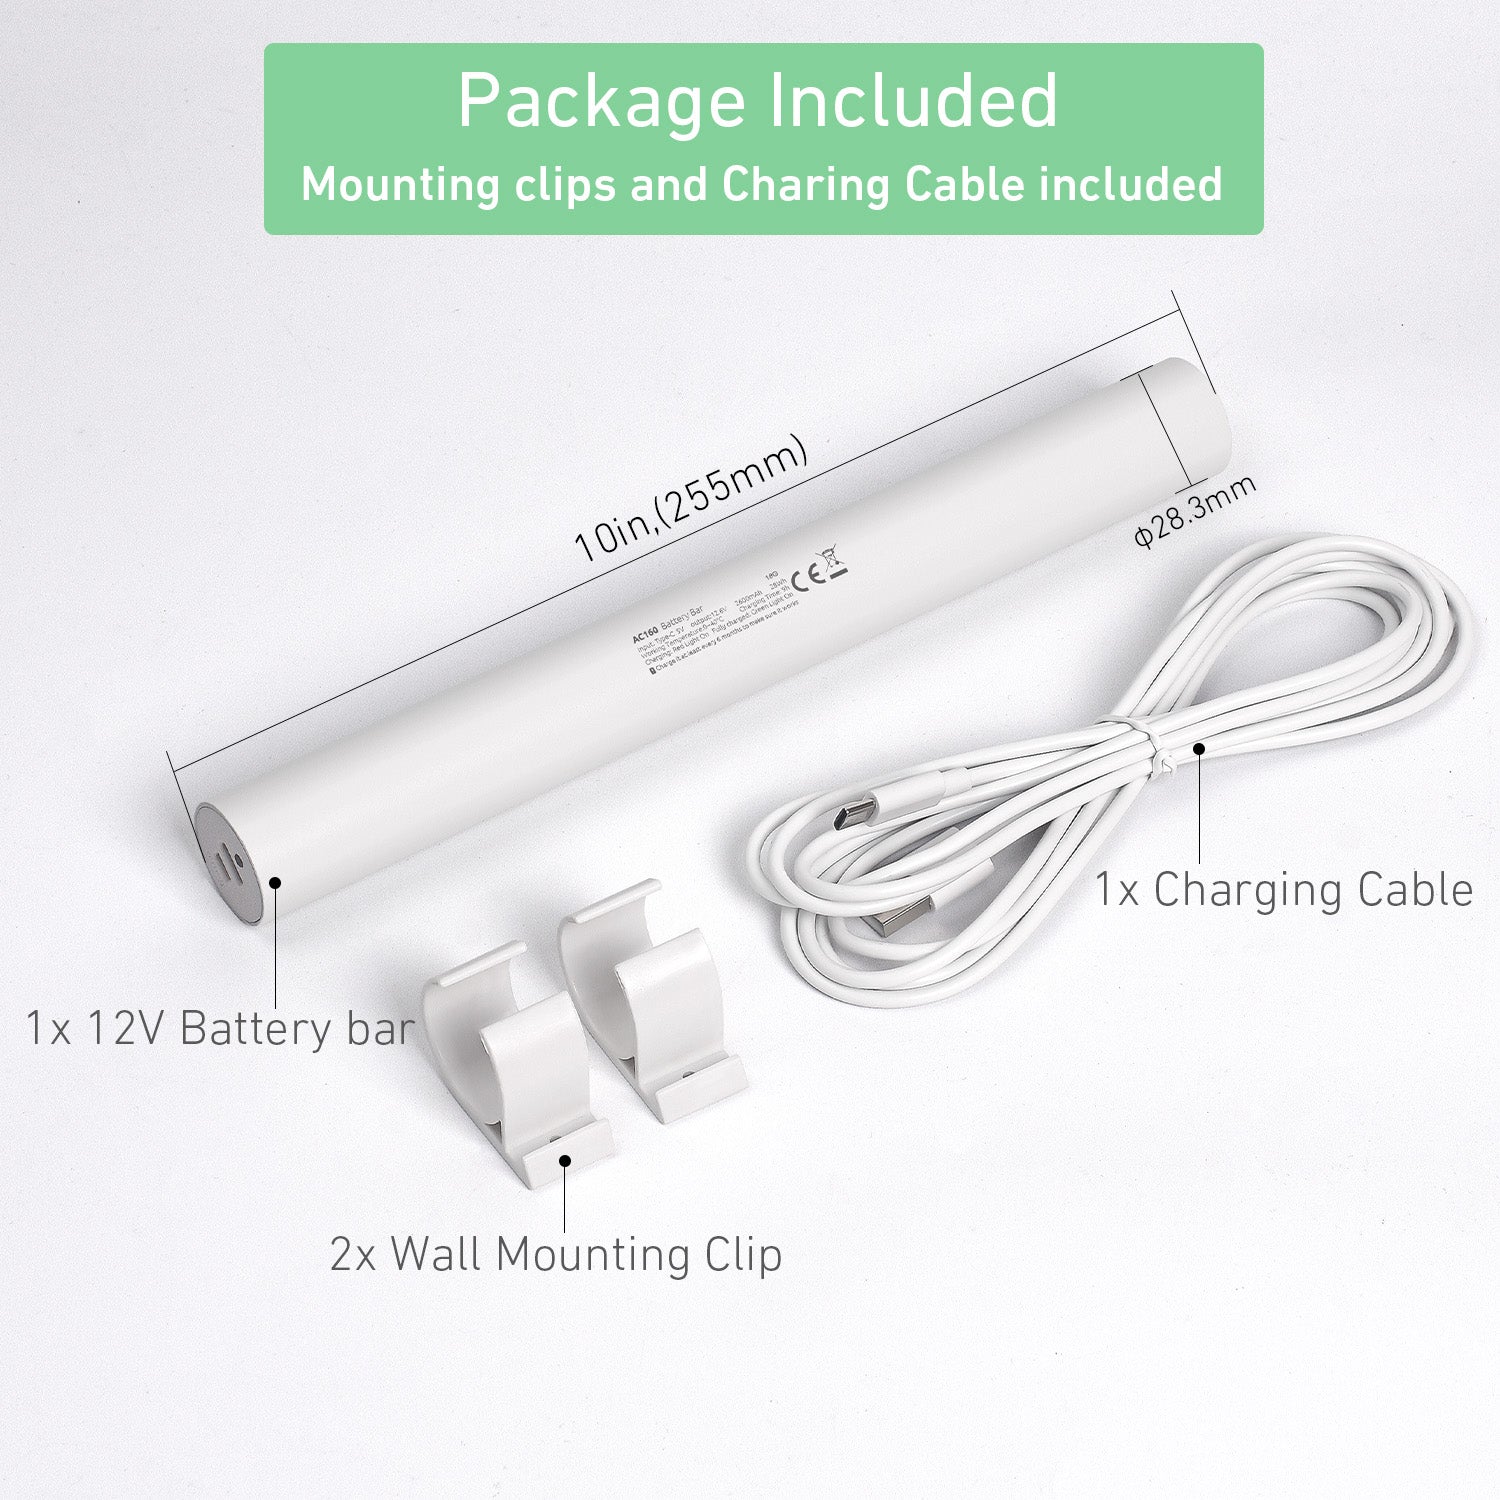 12.6V Lithium Ion Rechargeable Pack Wand - Power and Charge Blinds, Shades Curtains - 2600mAh, Output 5V 1A,  Easy to Install - Includes Wall Mounting Clips,Type-C Cable